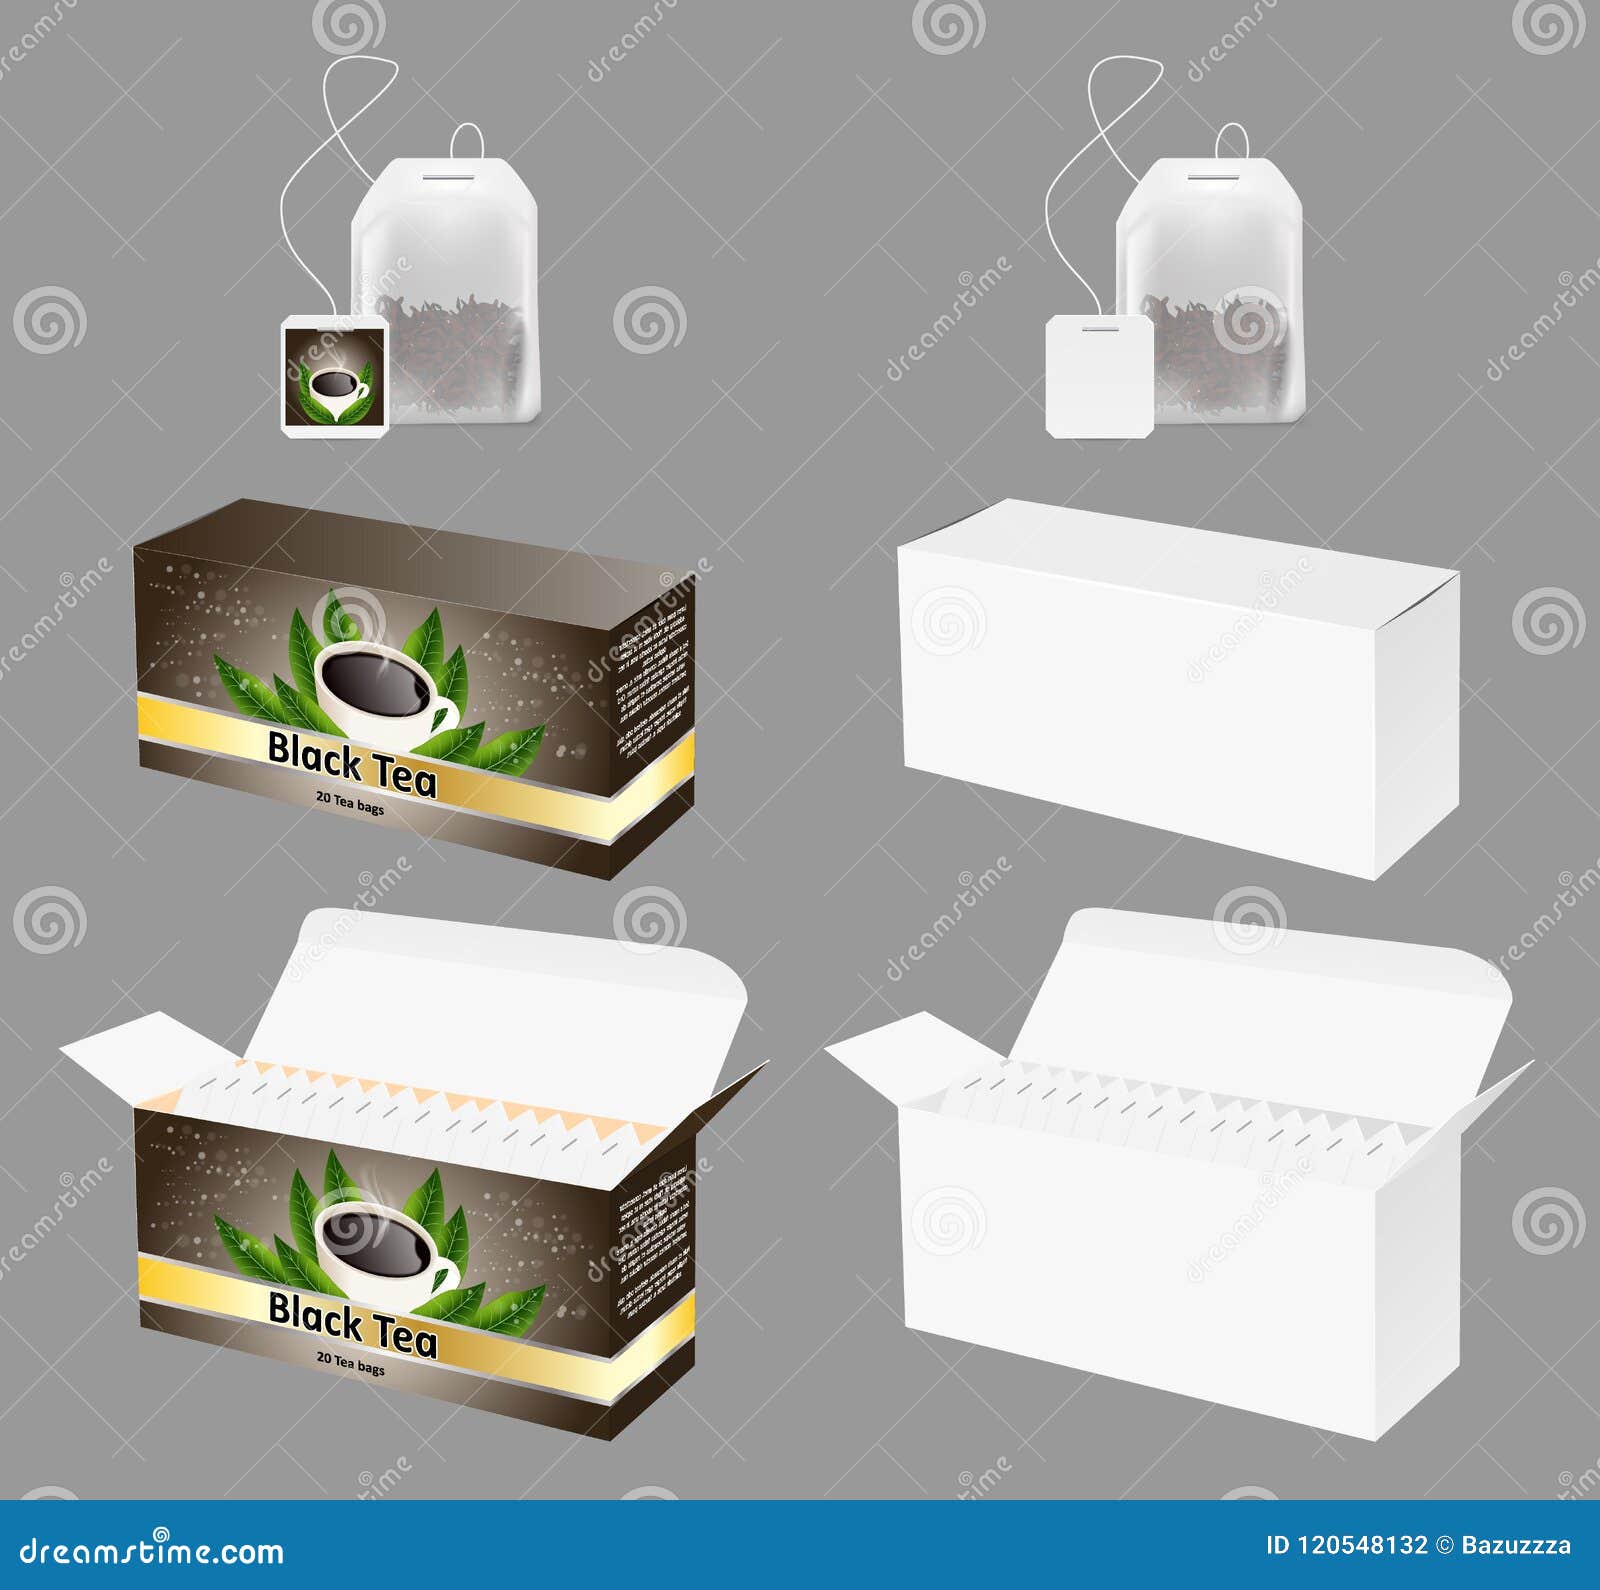 Kinds of Tea Packaging Materials - Spackmachine